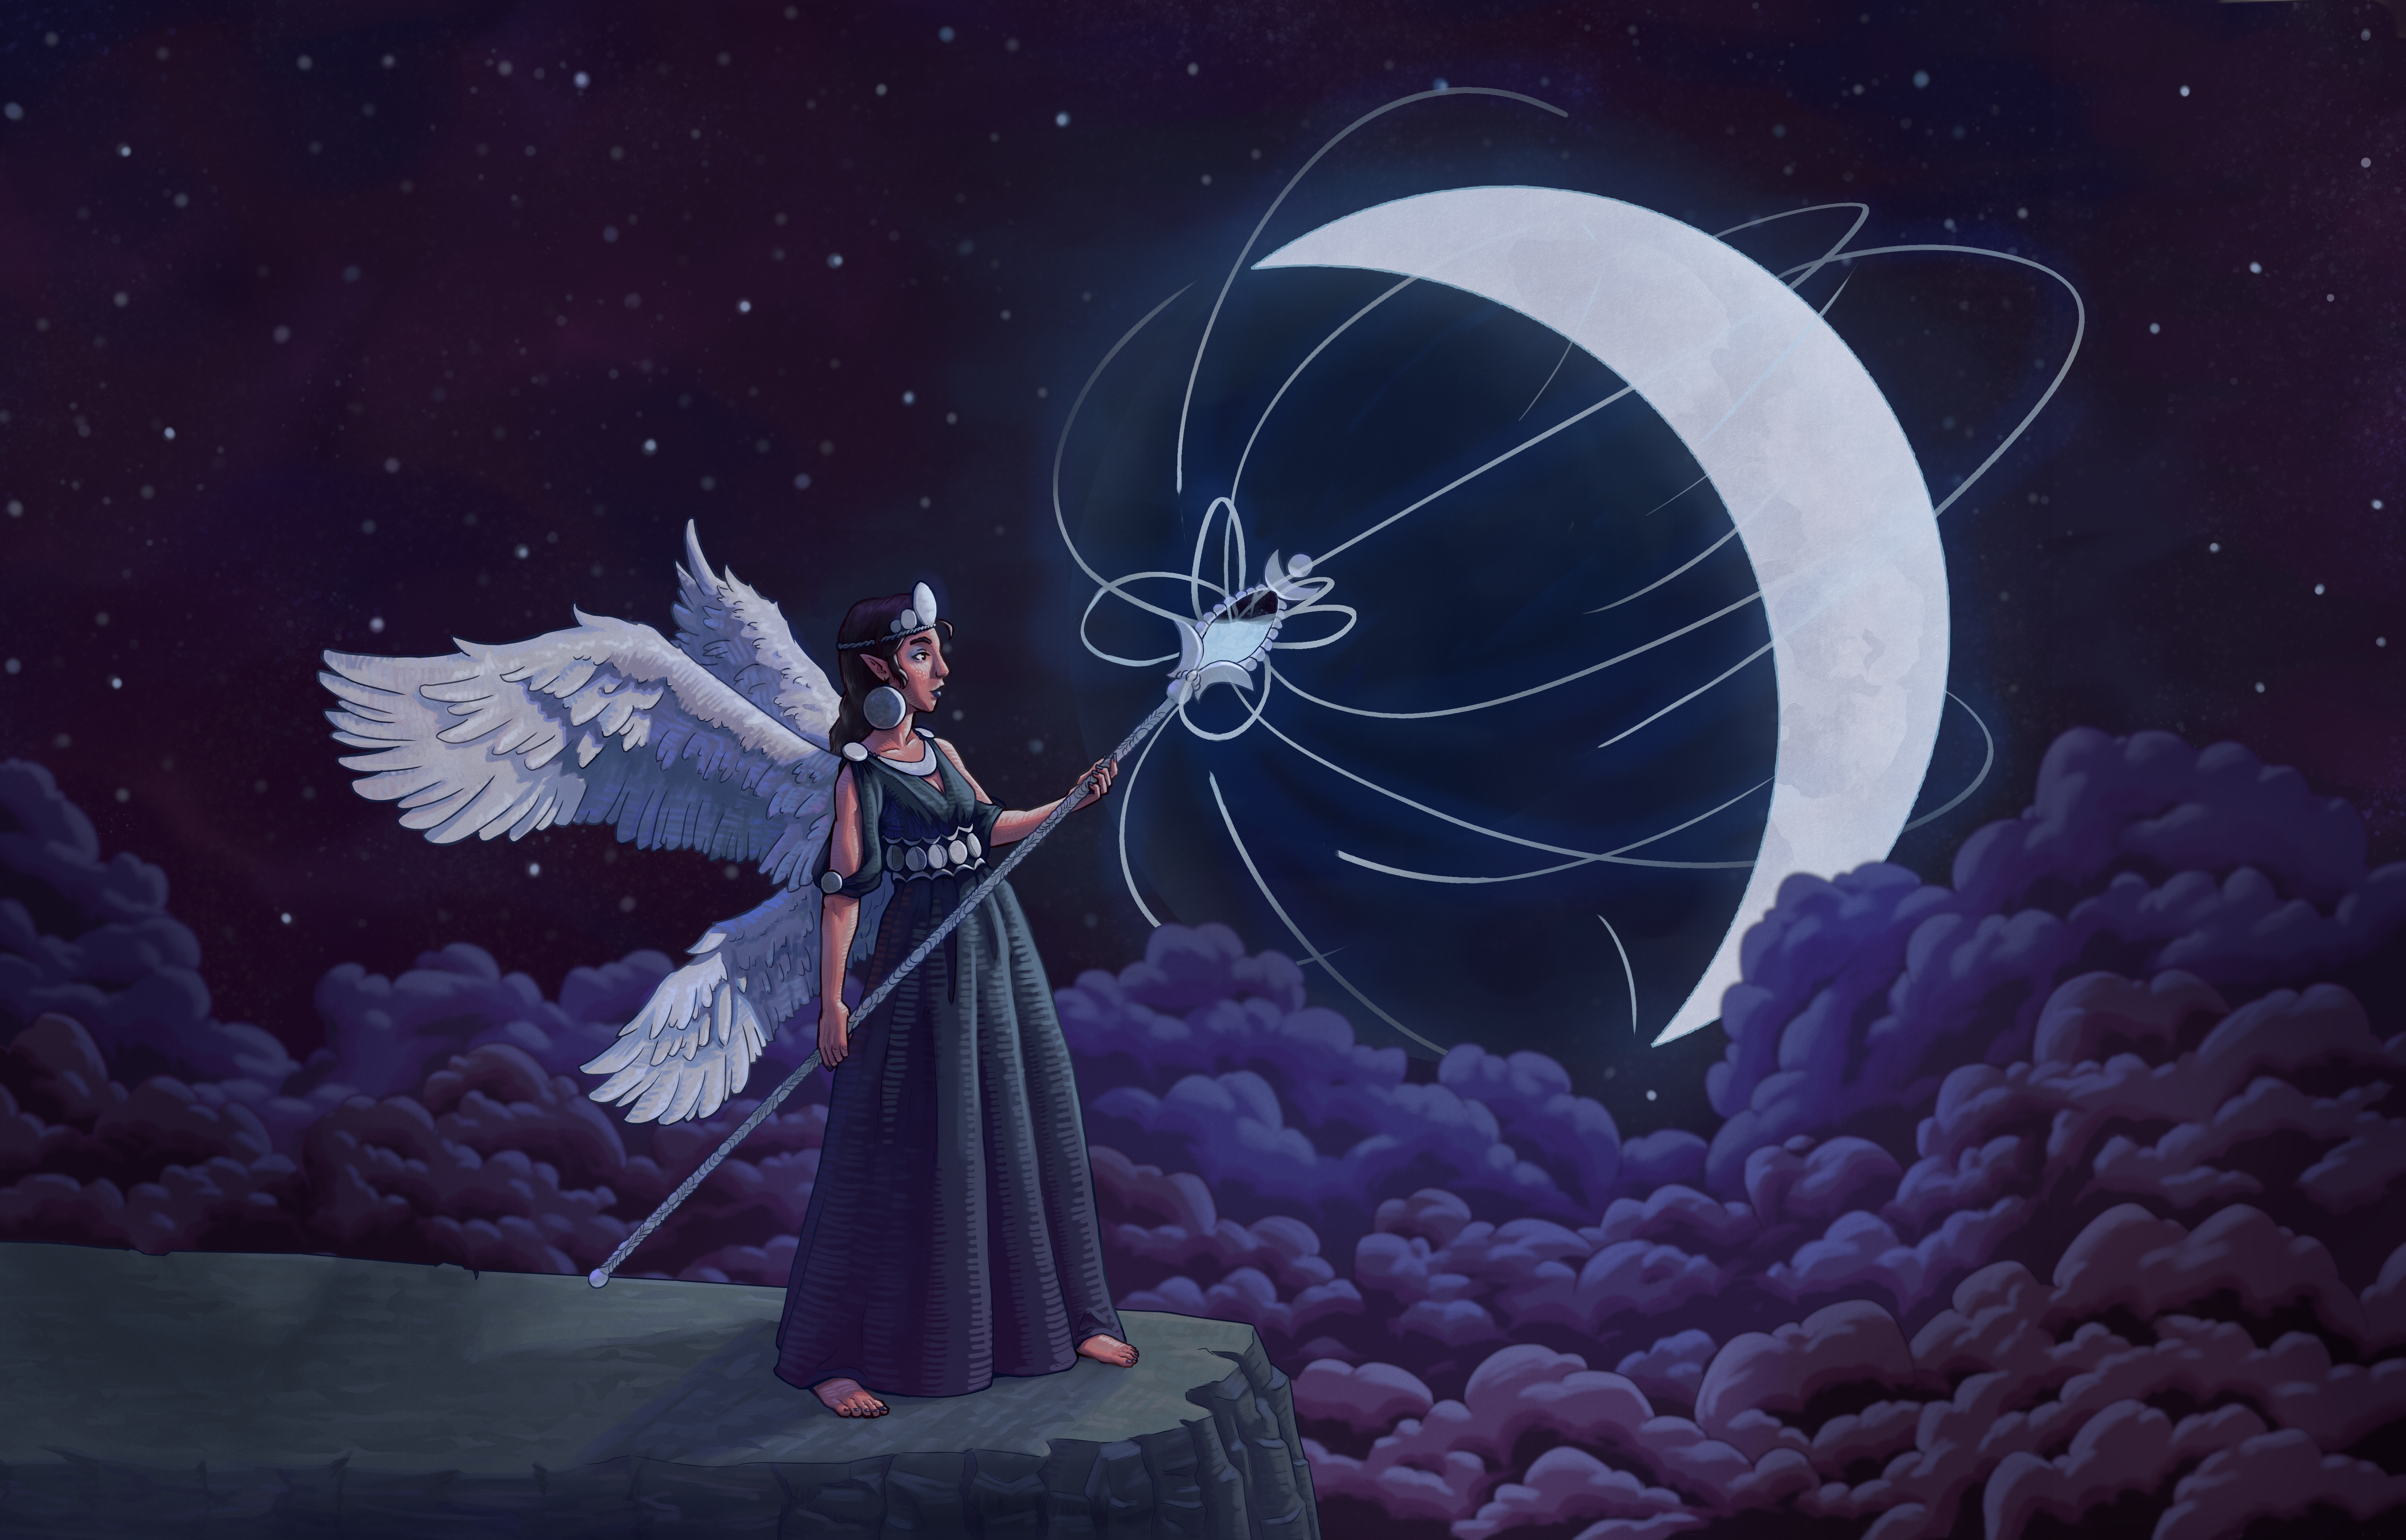 A woman in a long blue dress standing on a mountain cliff,
surrounded by clouds and lit by a crescent moon.
She has two pairs of wings on her back and points a staff towards the moon.
Glowing particles stream from the moon to the staff.
